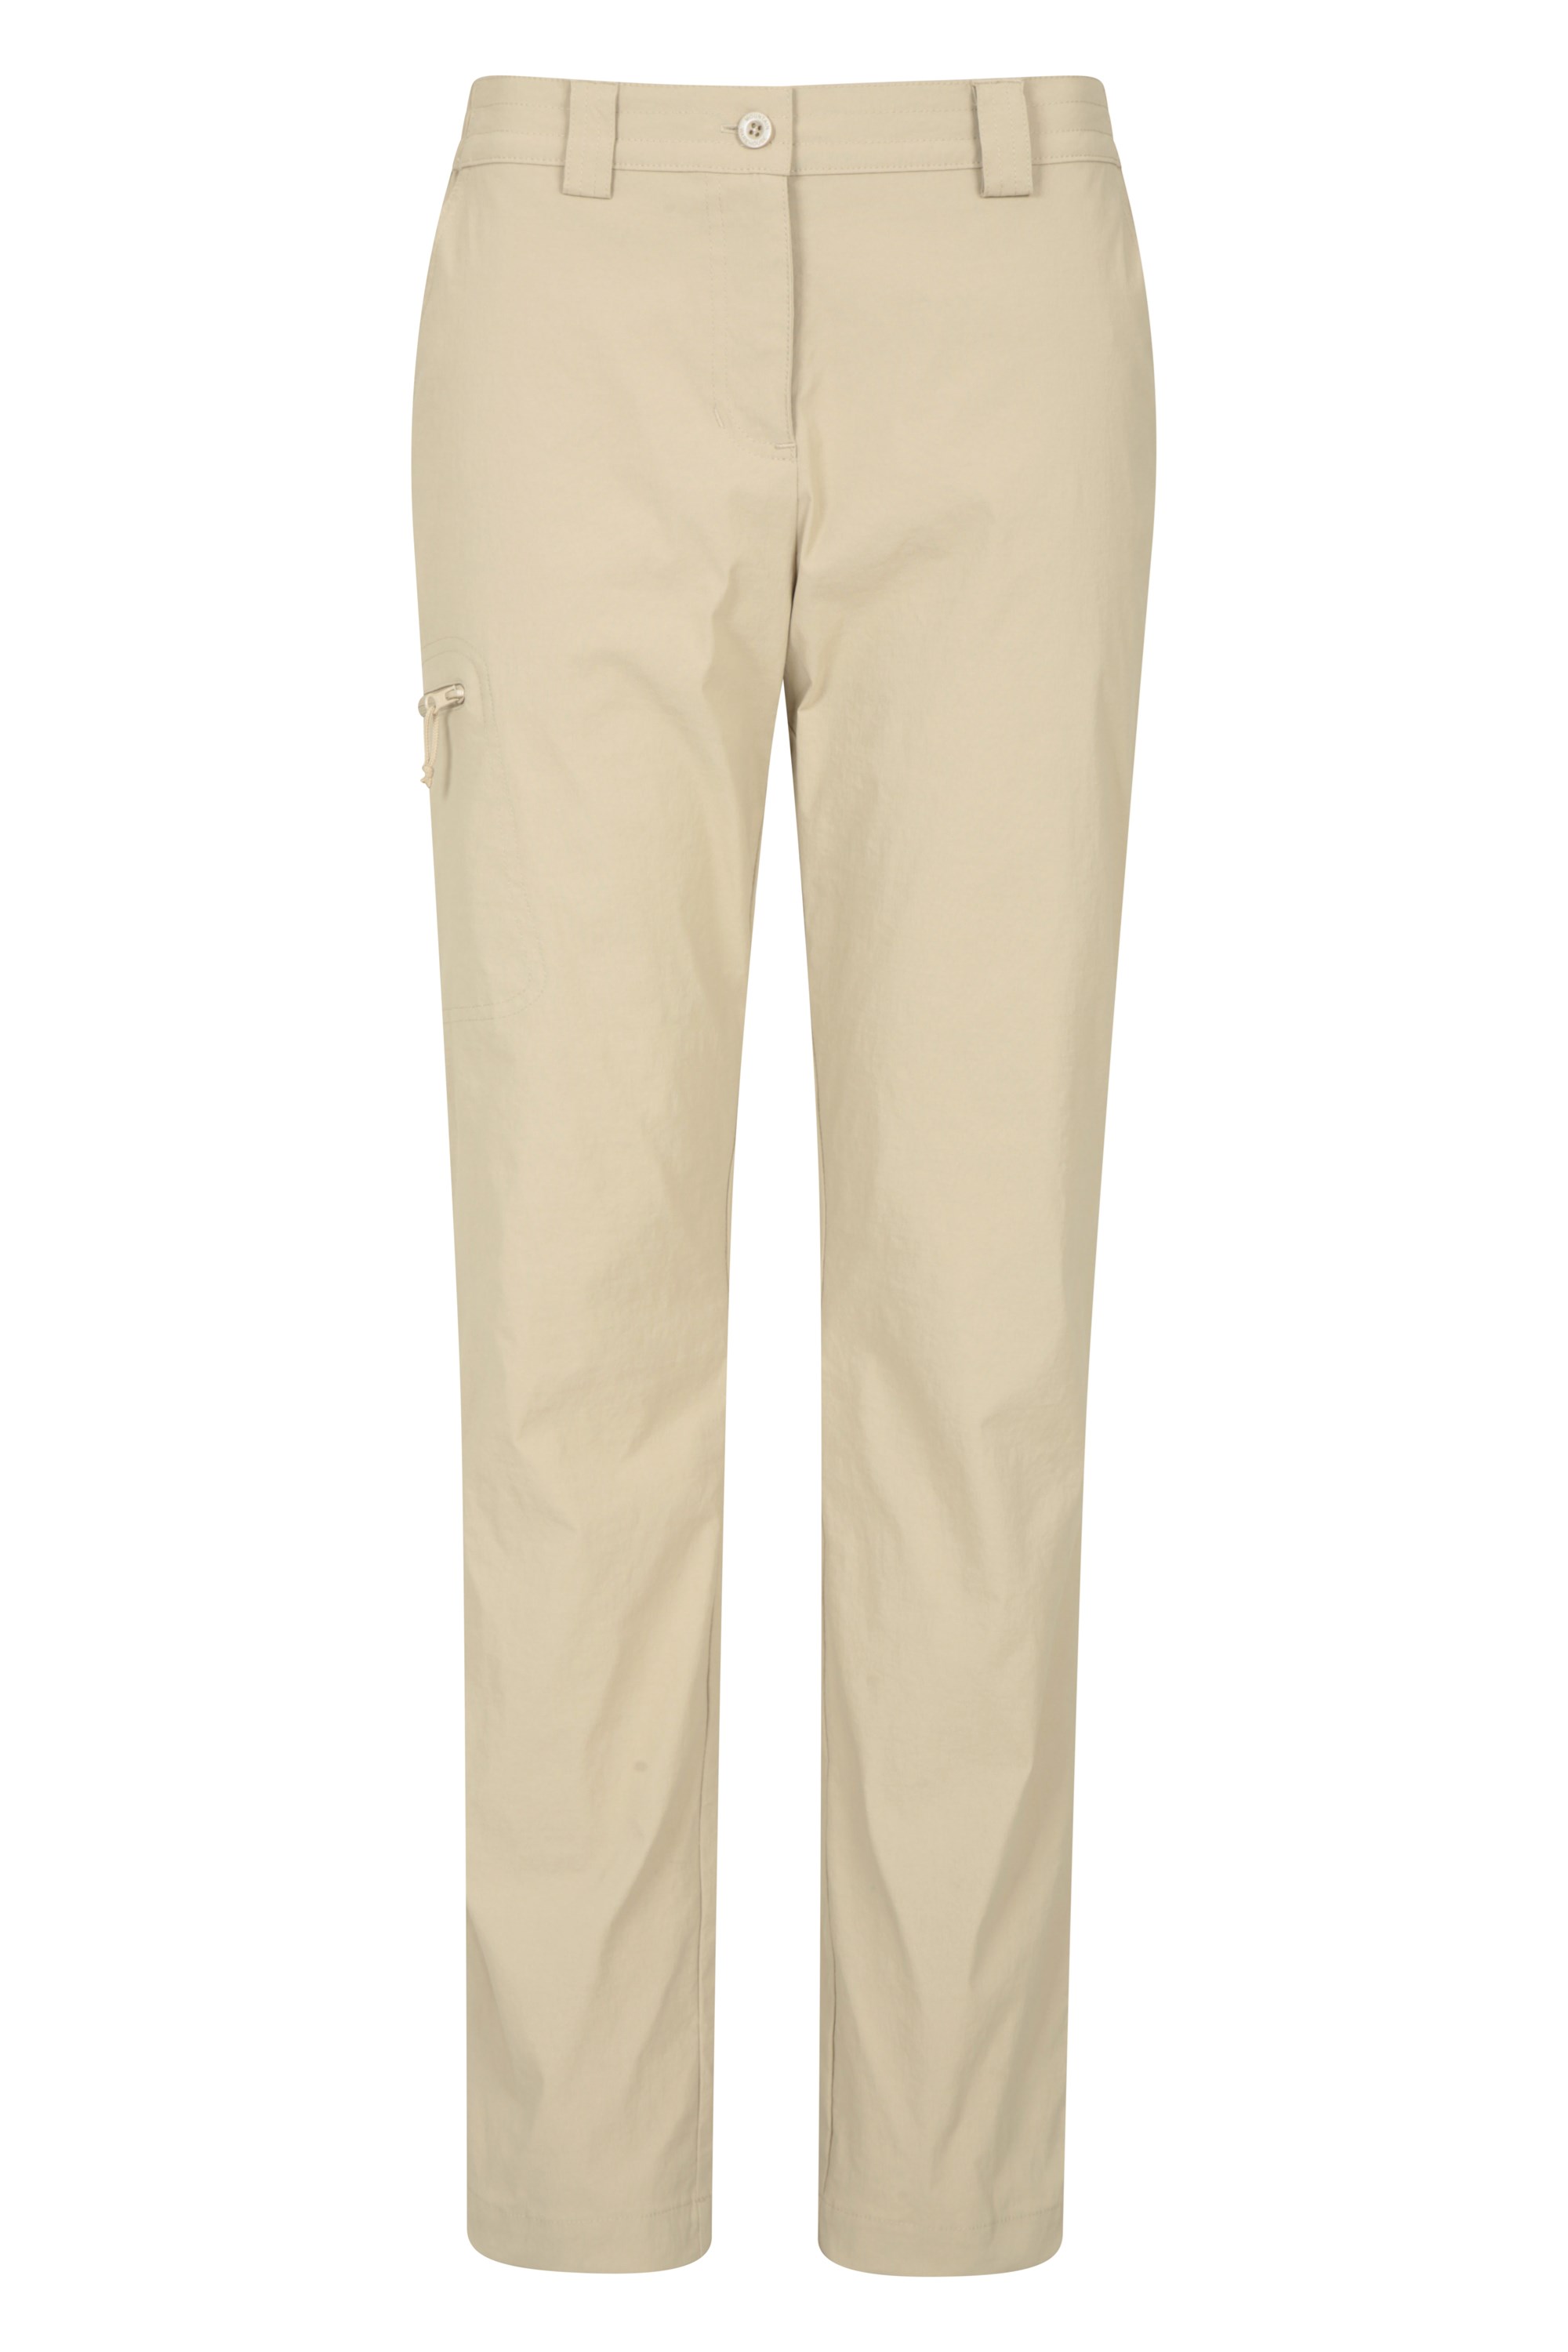 Expedition Hybrid Womens Pants